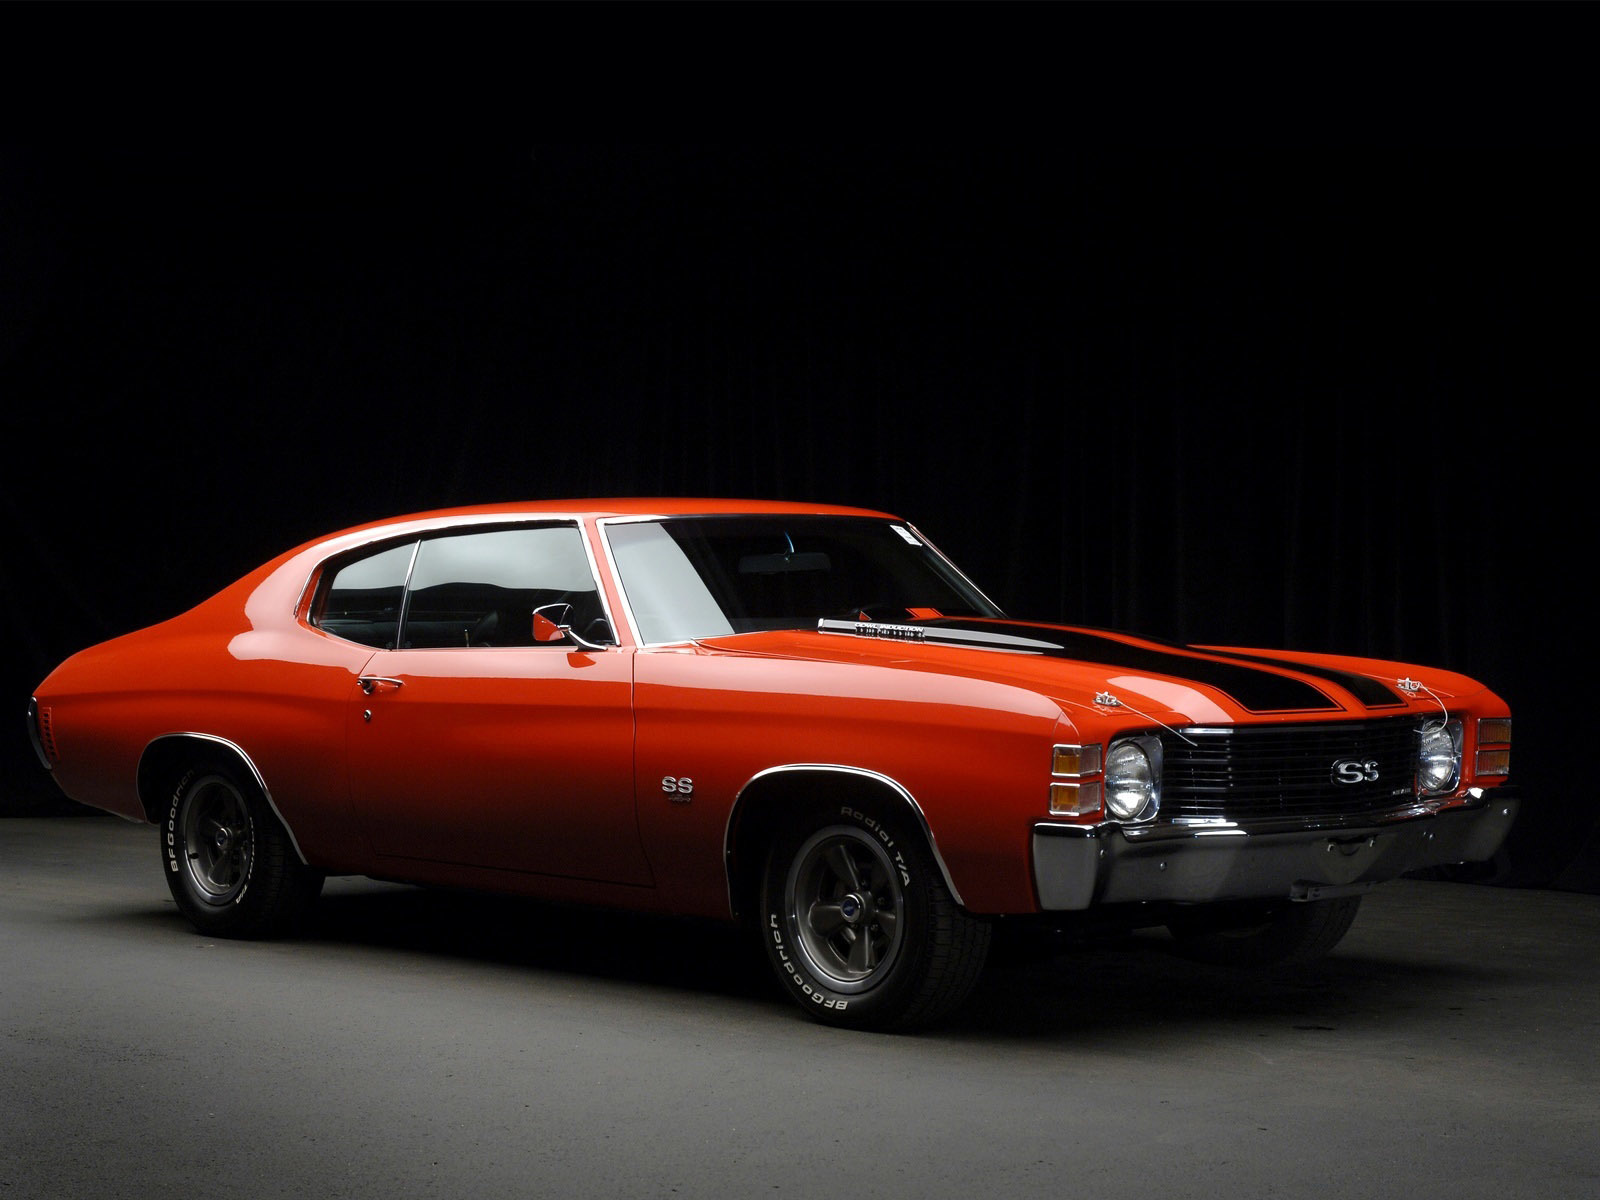 Muscle Cars Wallpaper on Muscle Cars Chevrolet Chevelle Ss Hd Wallpaper   Cars   Trucks